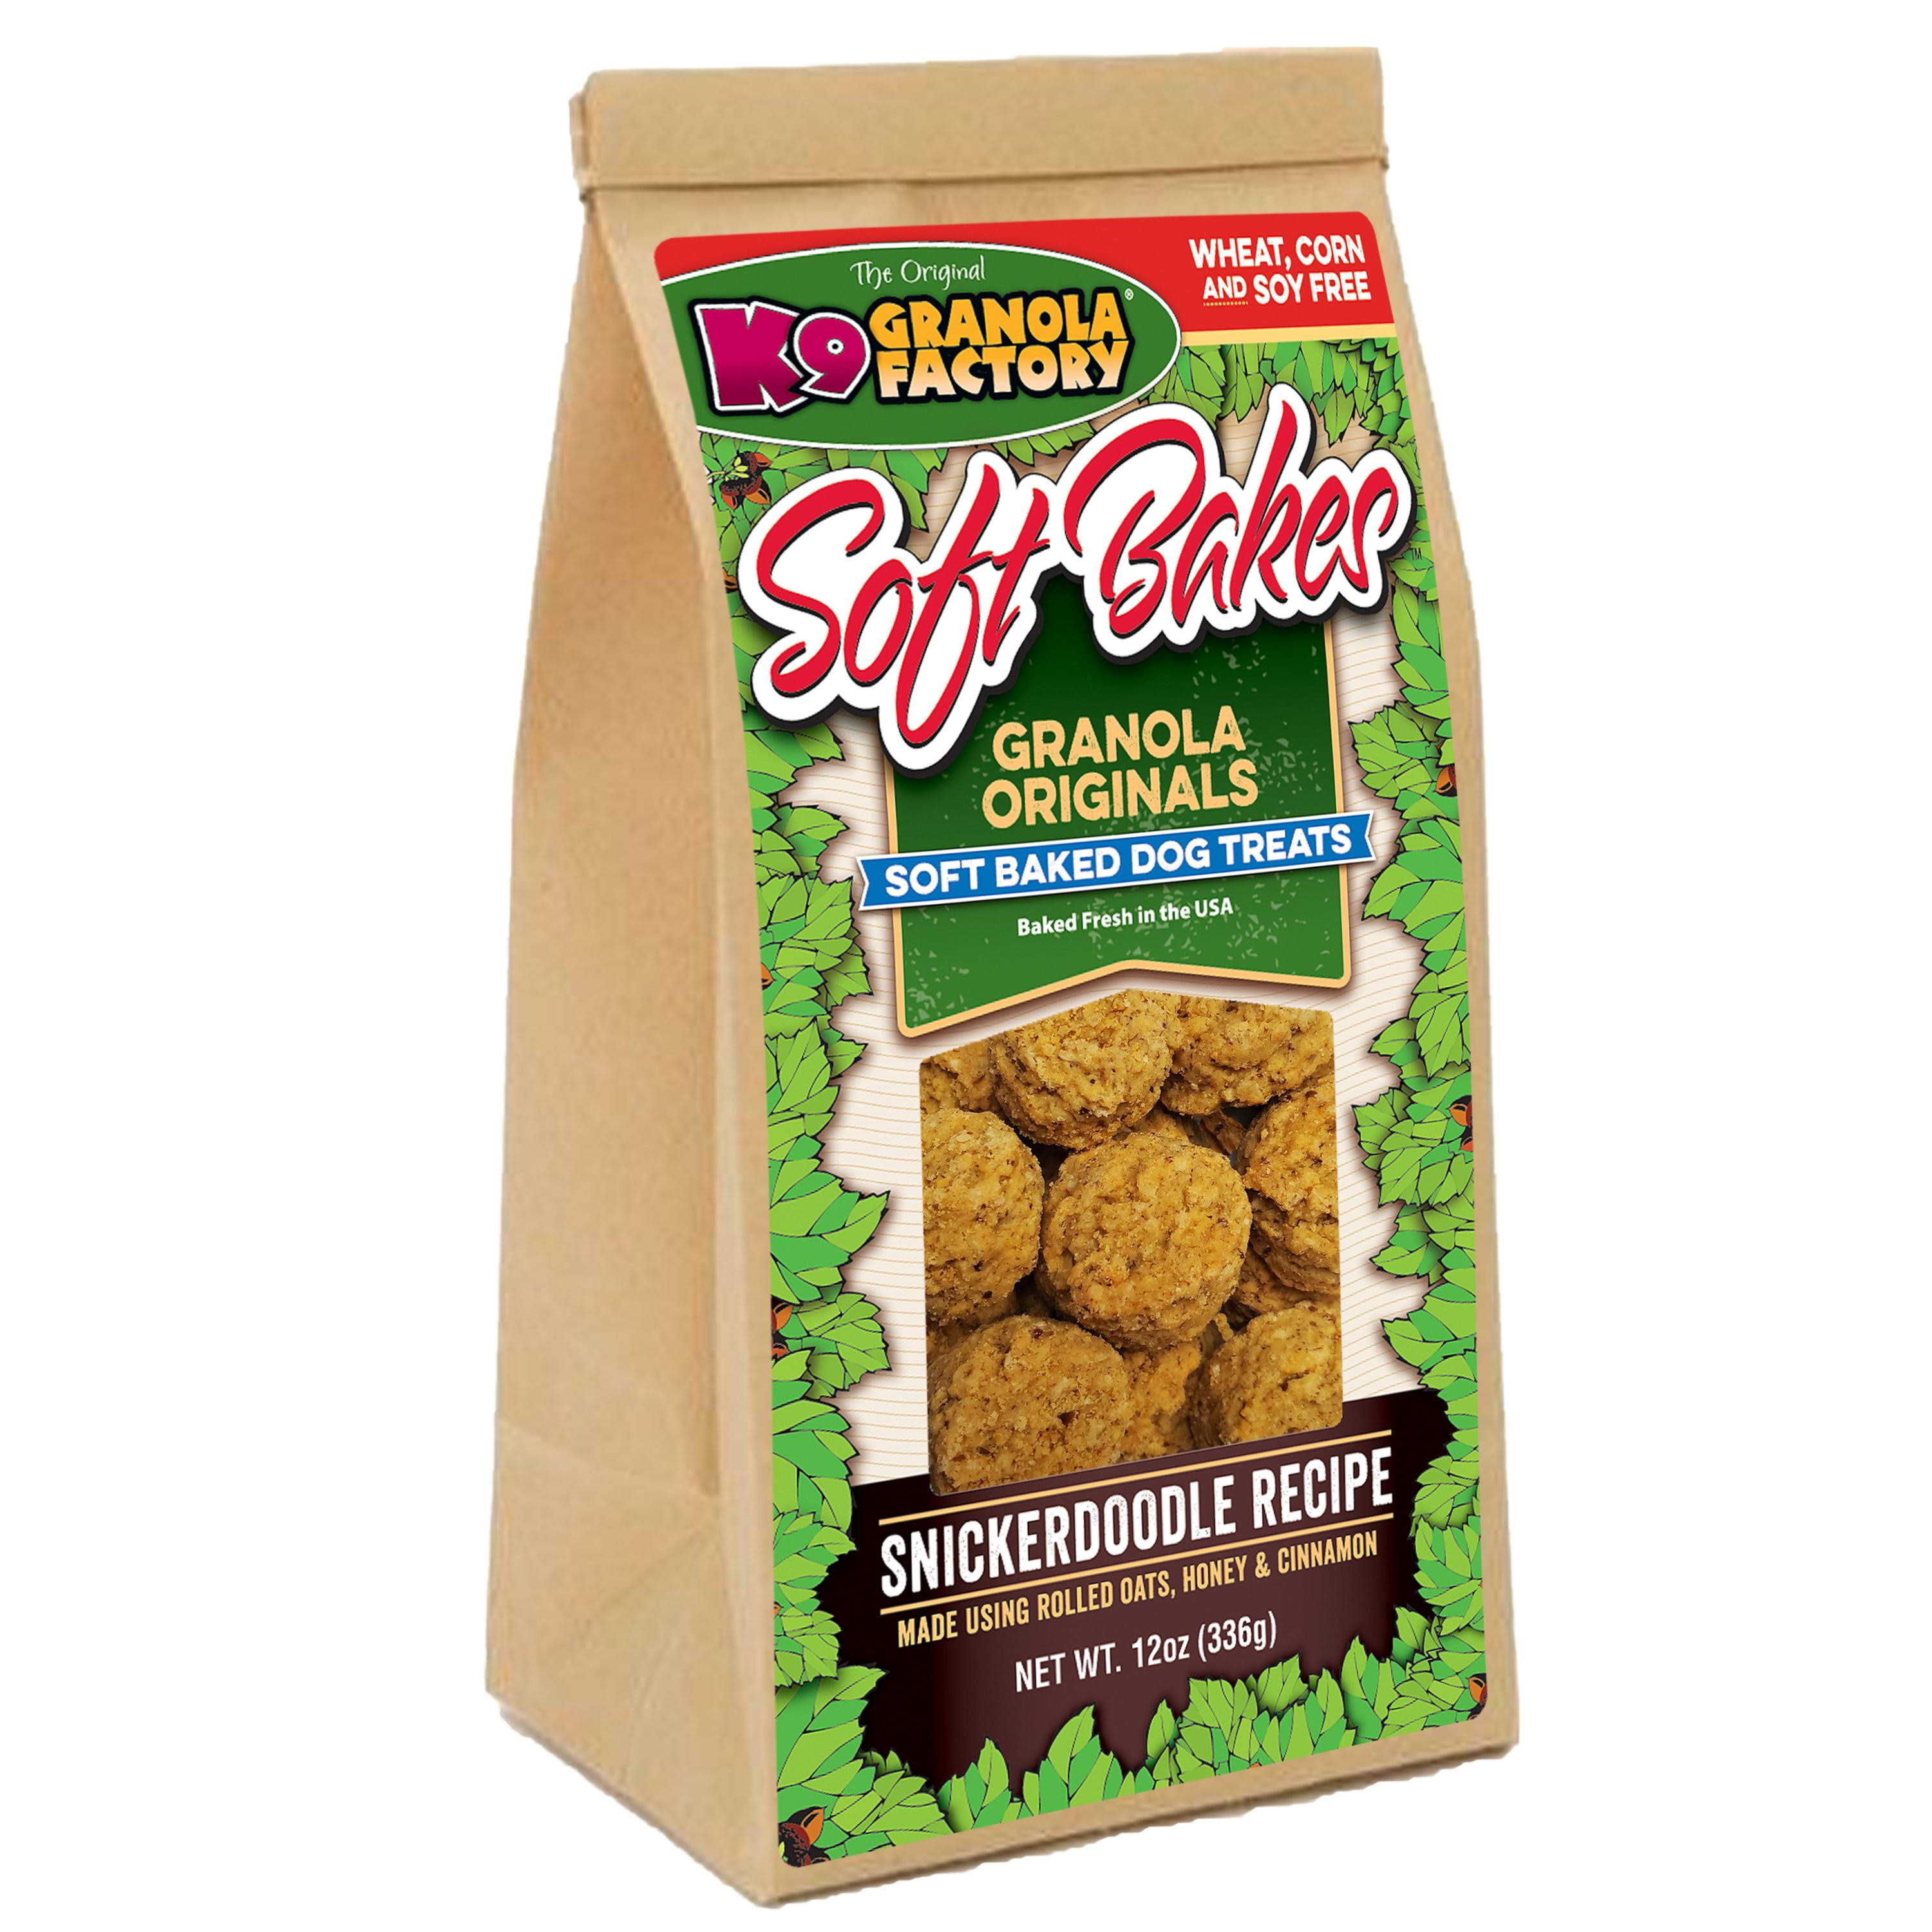 K9 Granola Factory Soft Bakes Limited Edition Snickerdoodle